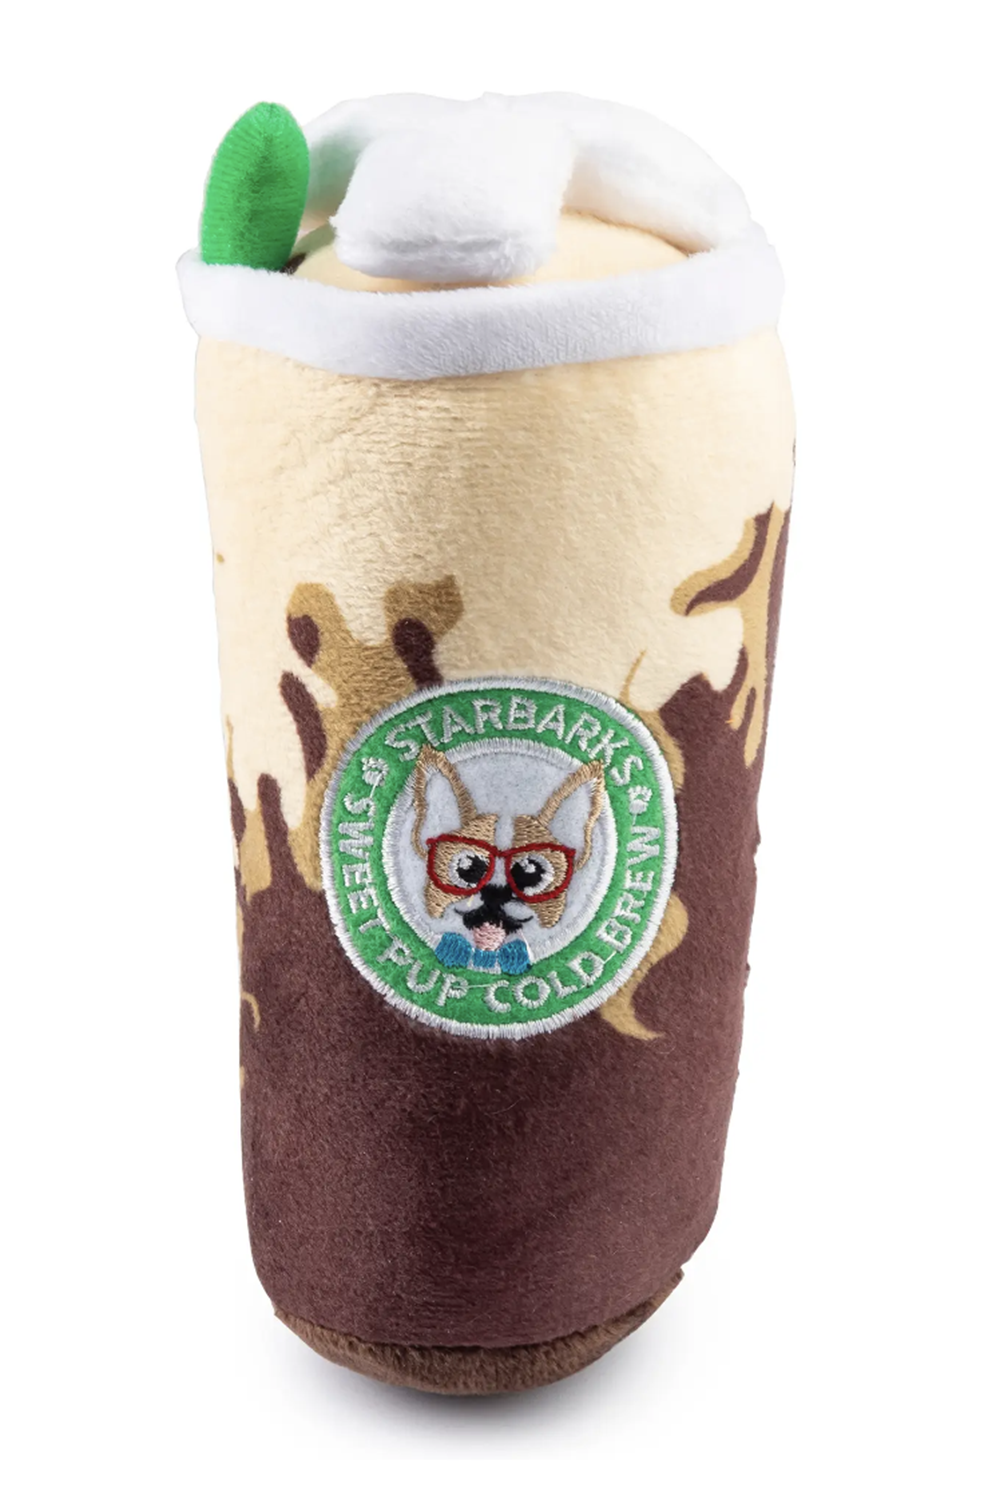 Funny Dog Toy - Starbarks Sweet Pup Cold Brew